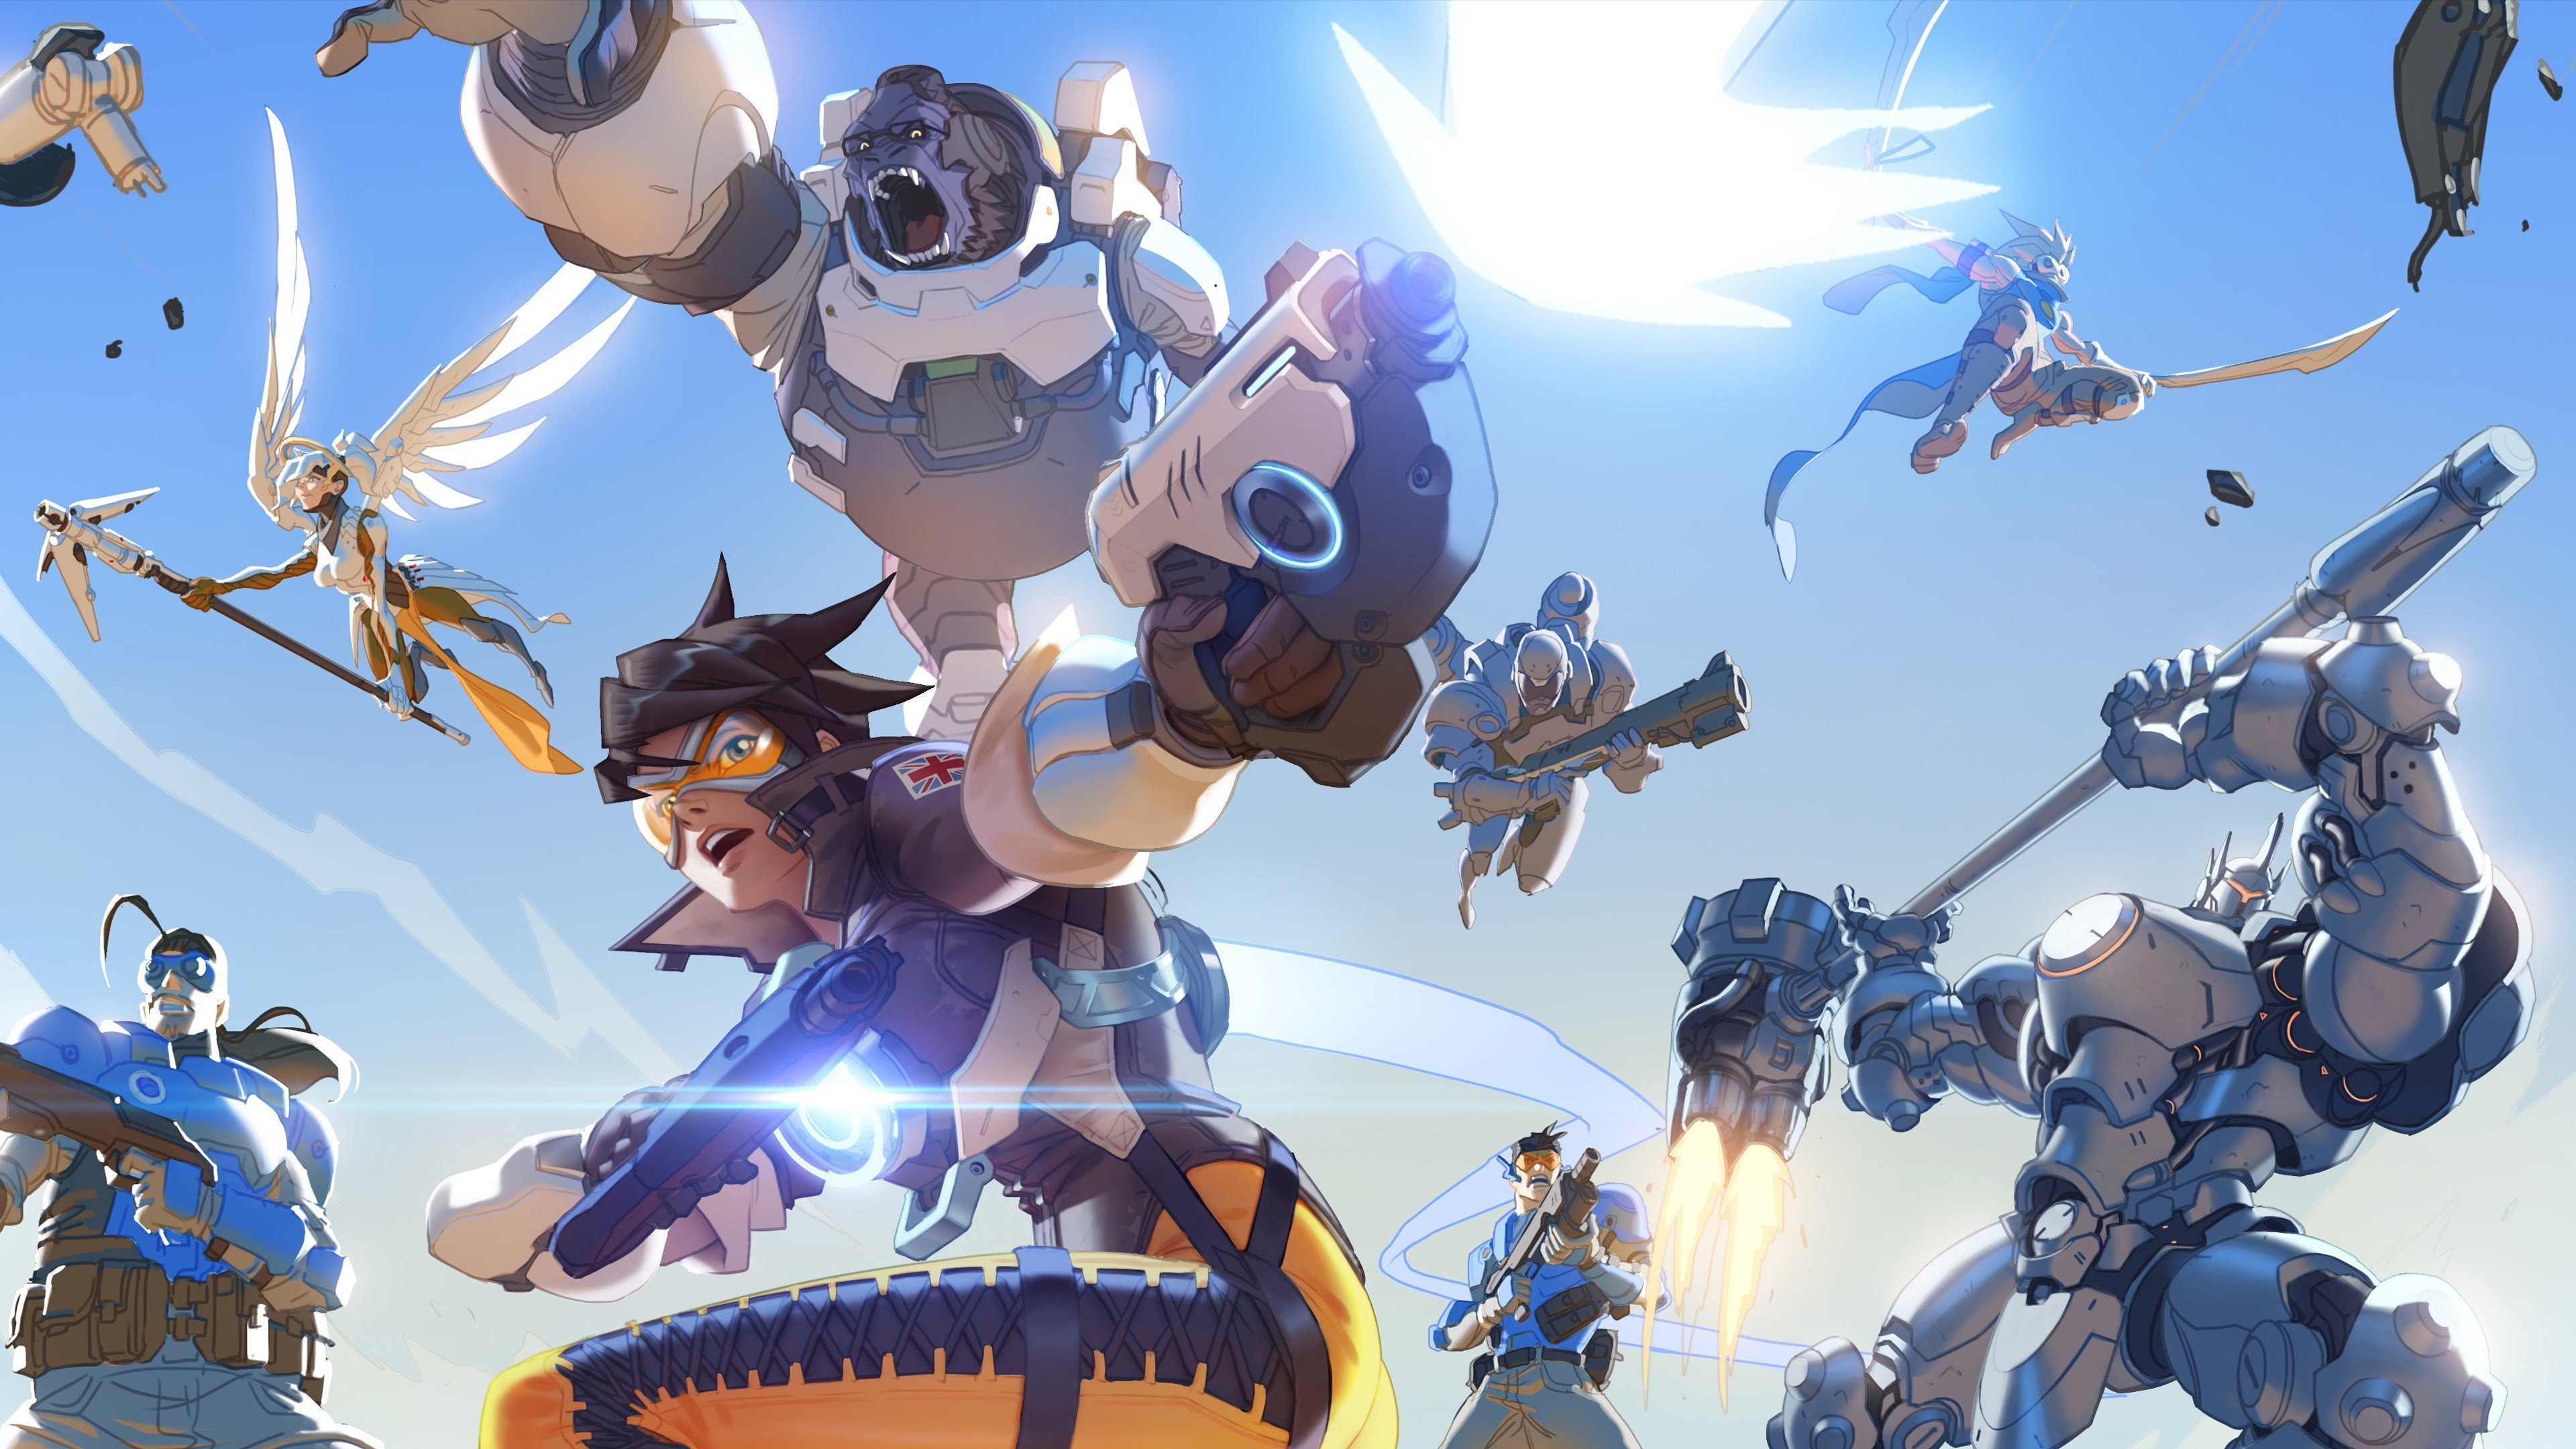 Overwatch Game for 3840 x 2160 Ultra HD resolution